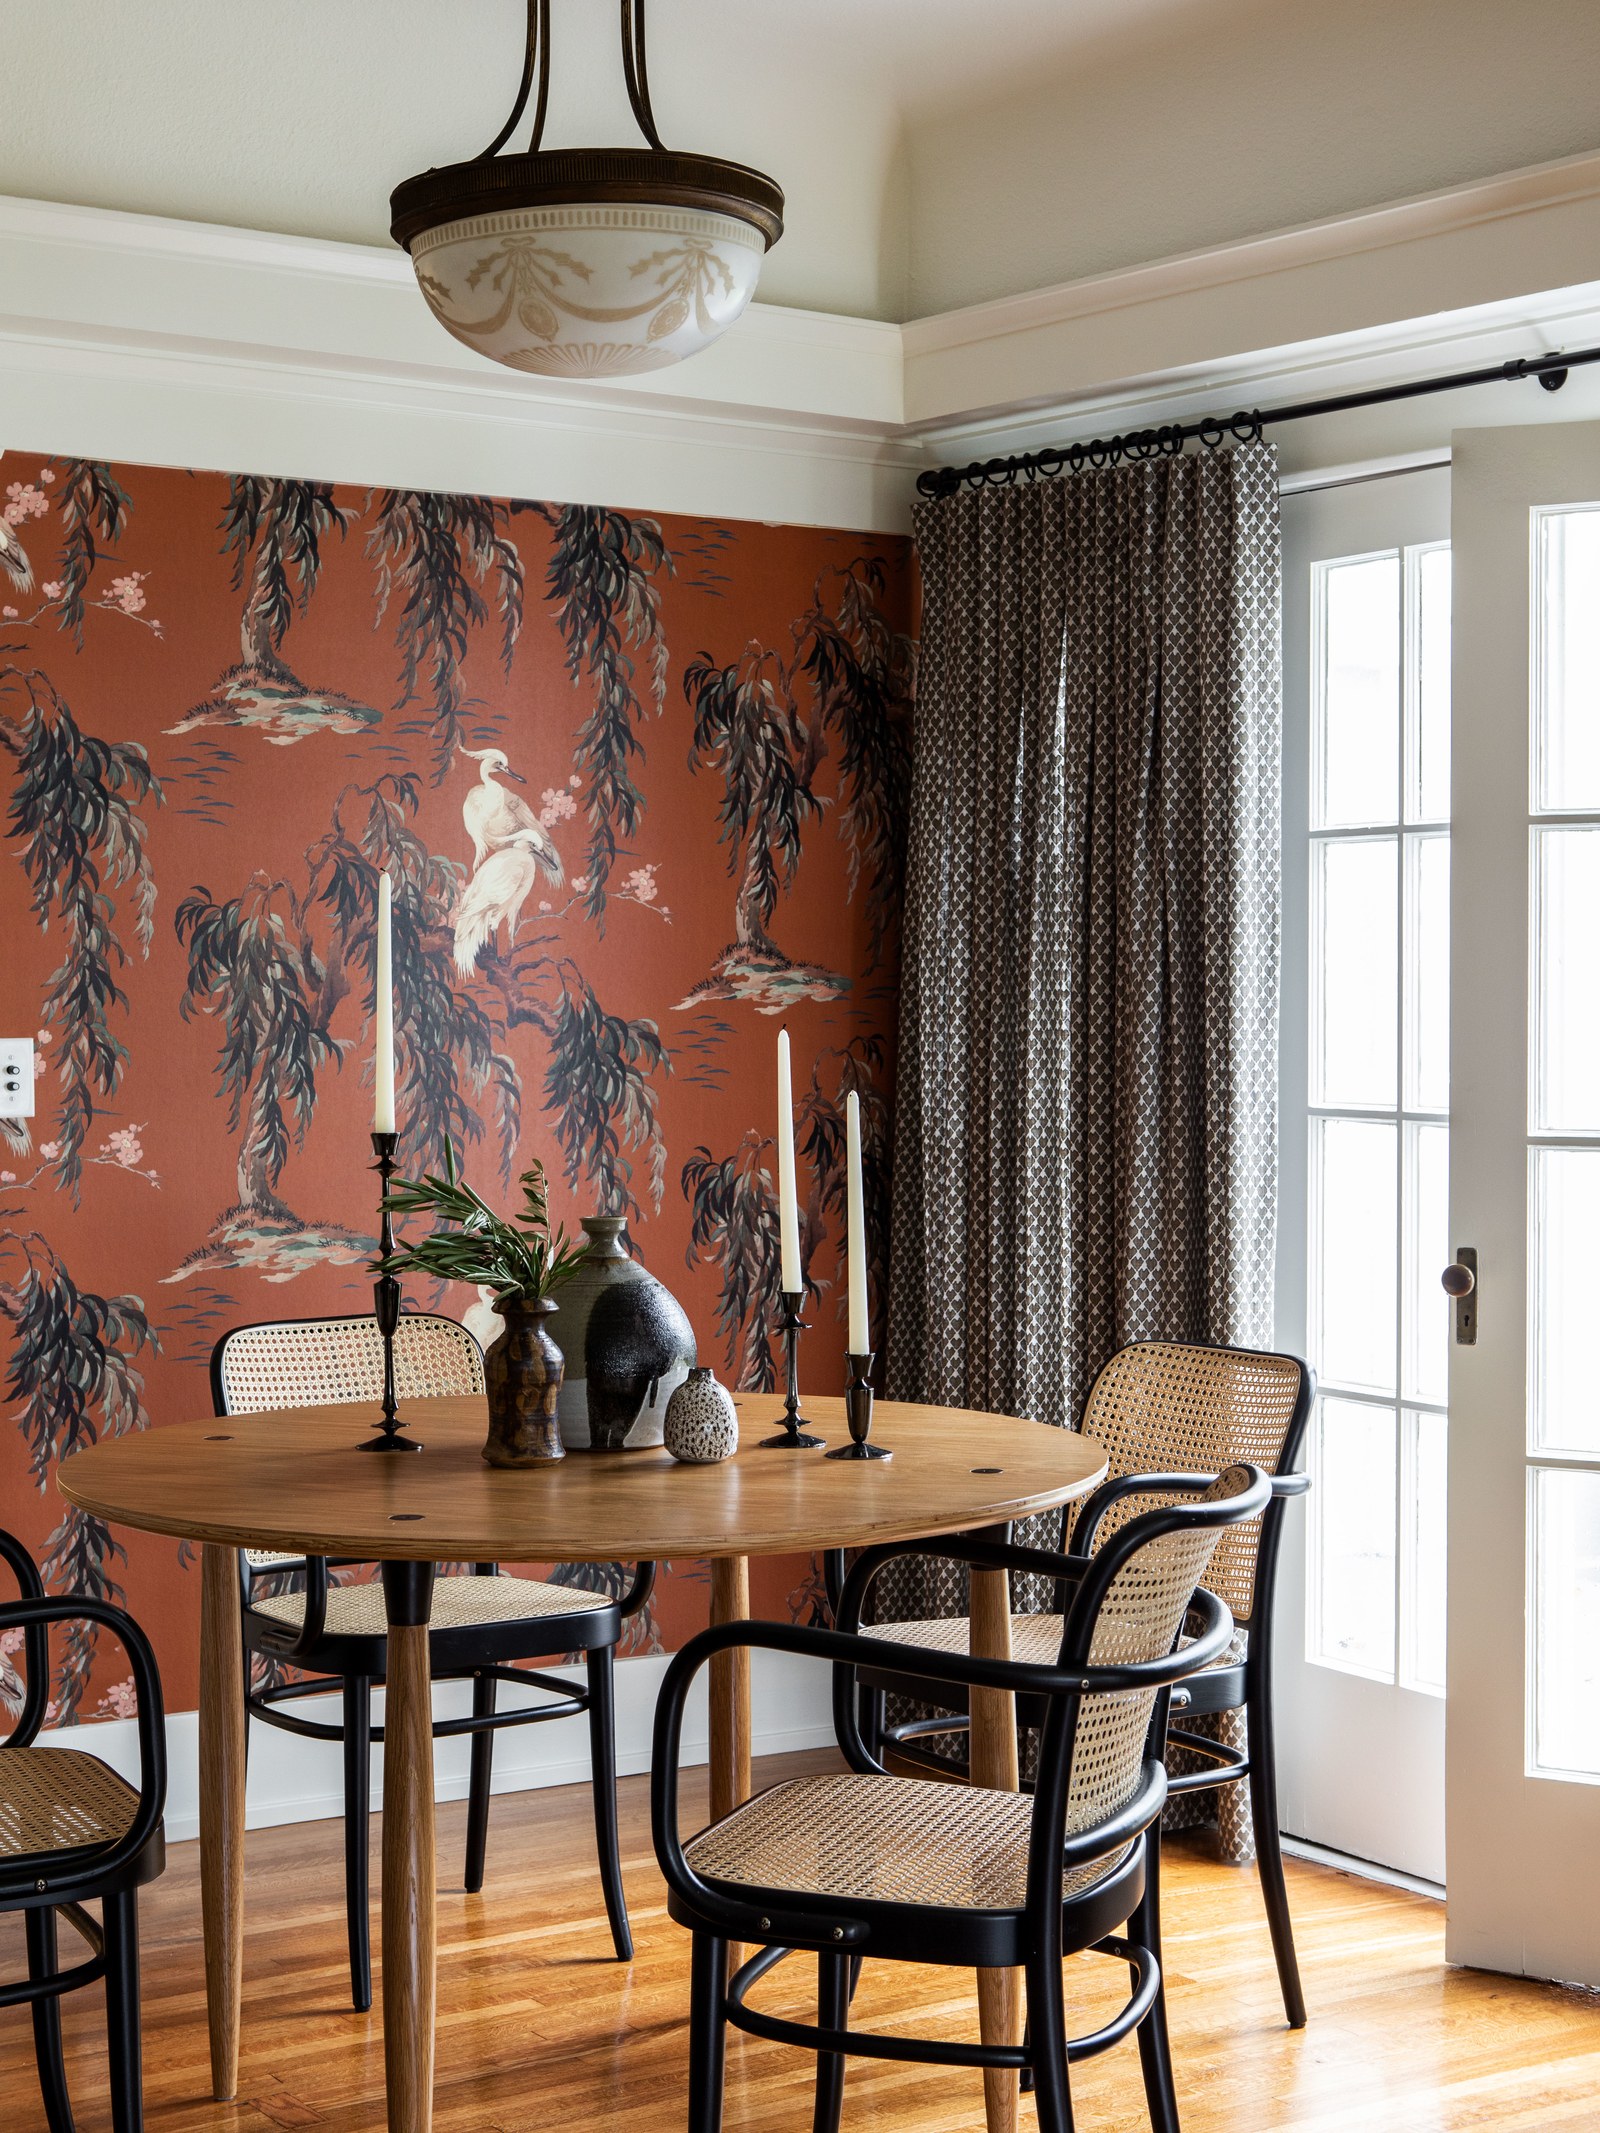 classic dining room with modern furnishings and crane wallpaper | modern historic craftsman house tour jacey duprie